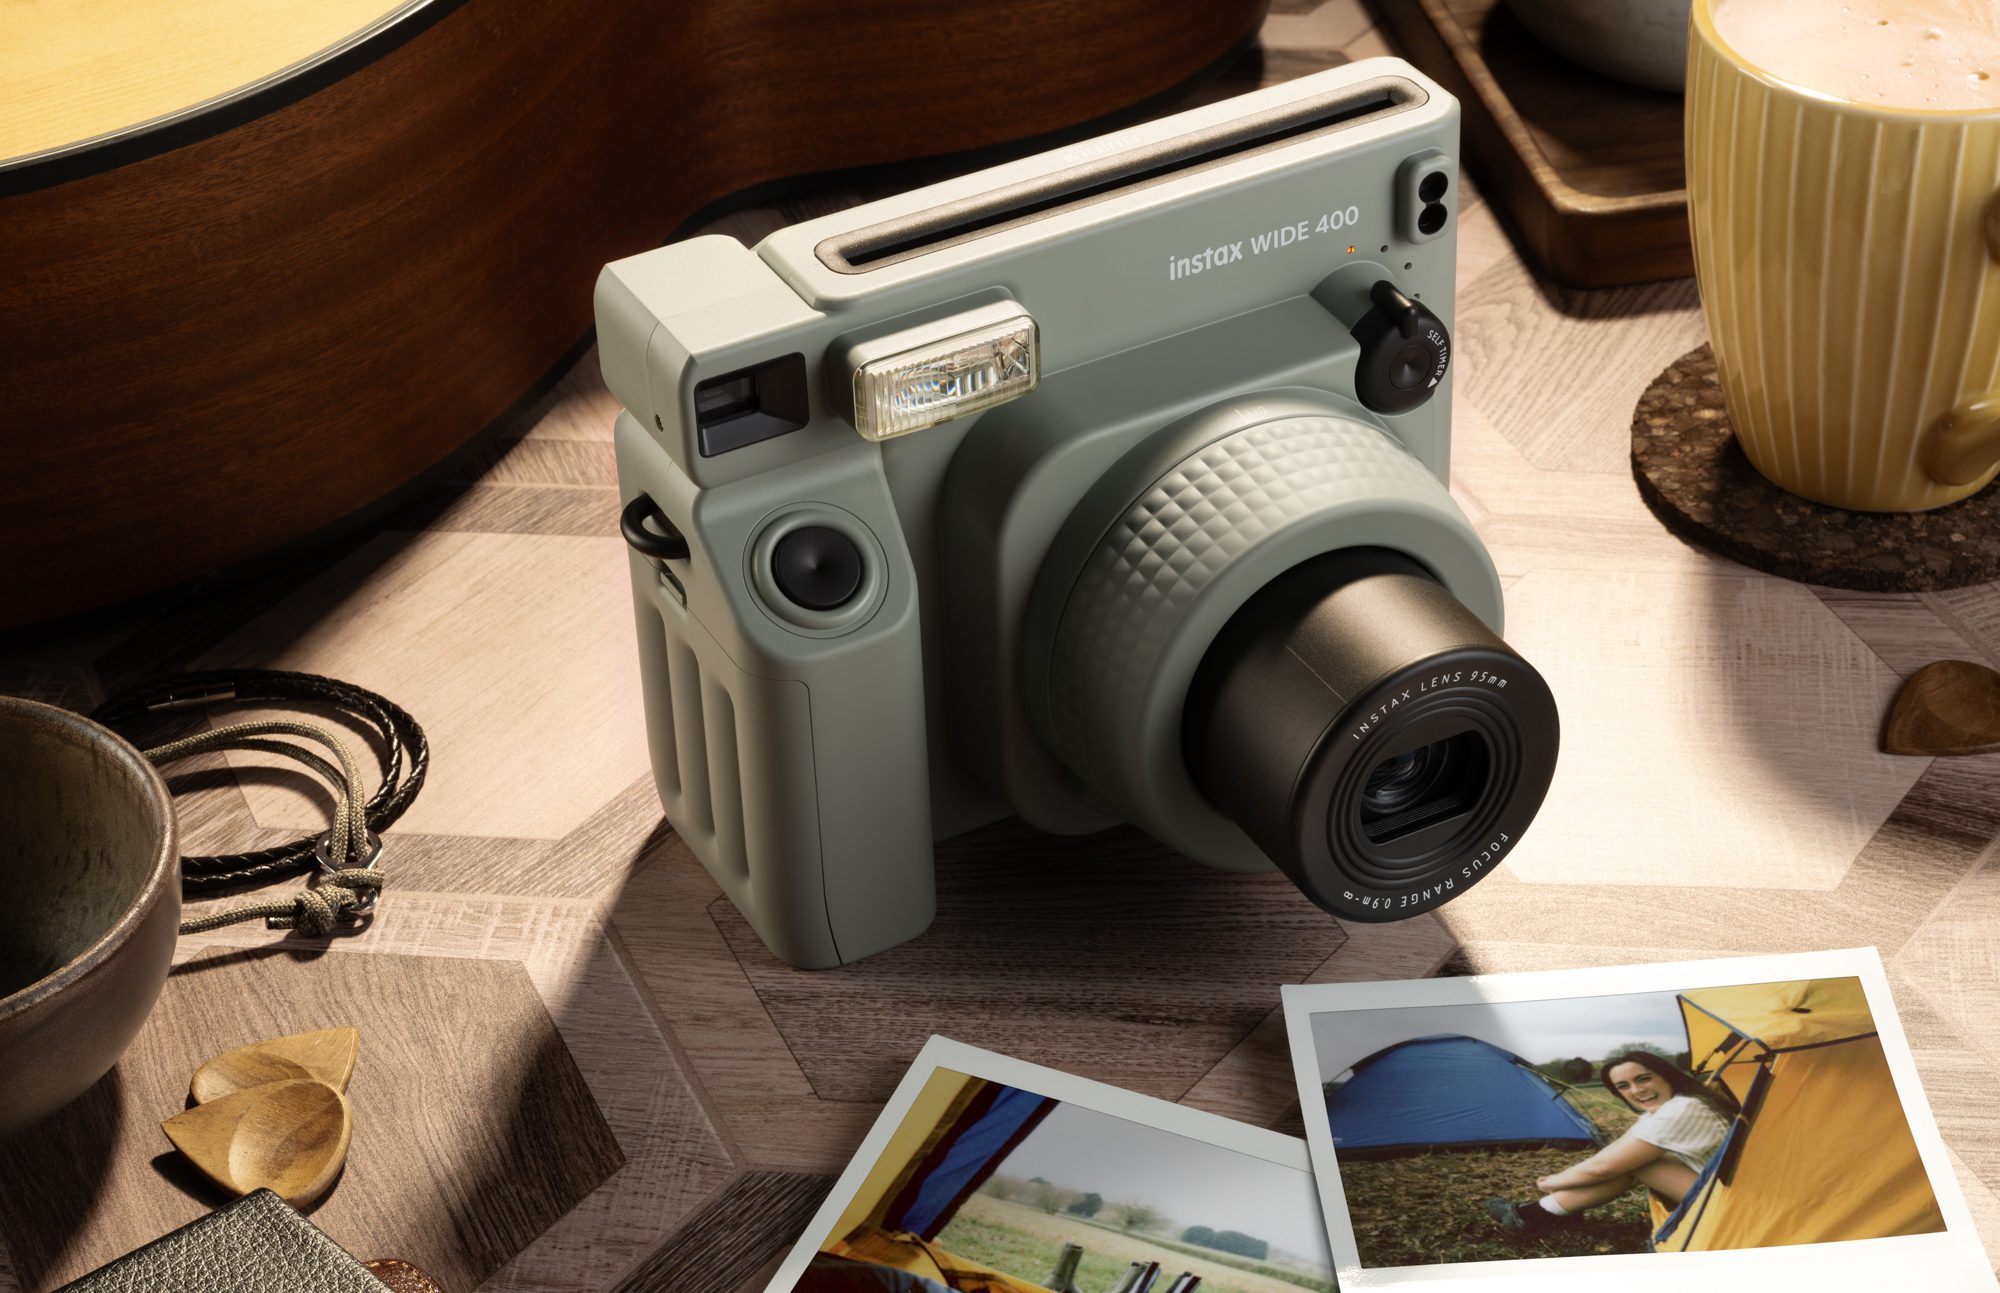 FUJIFILM Reveals New Instax WIDE 400 Instant Camera and Matching Mini LiPlay Colors